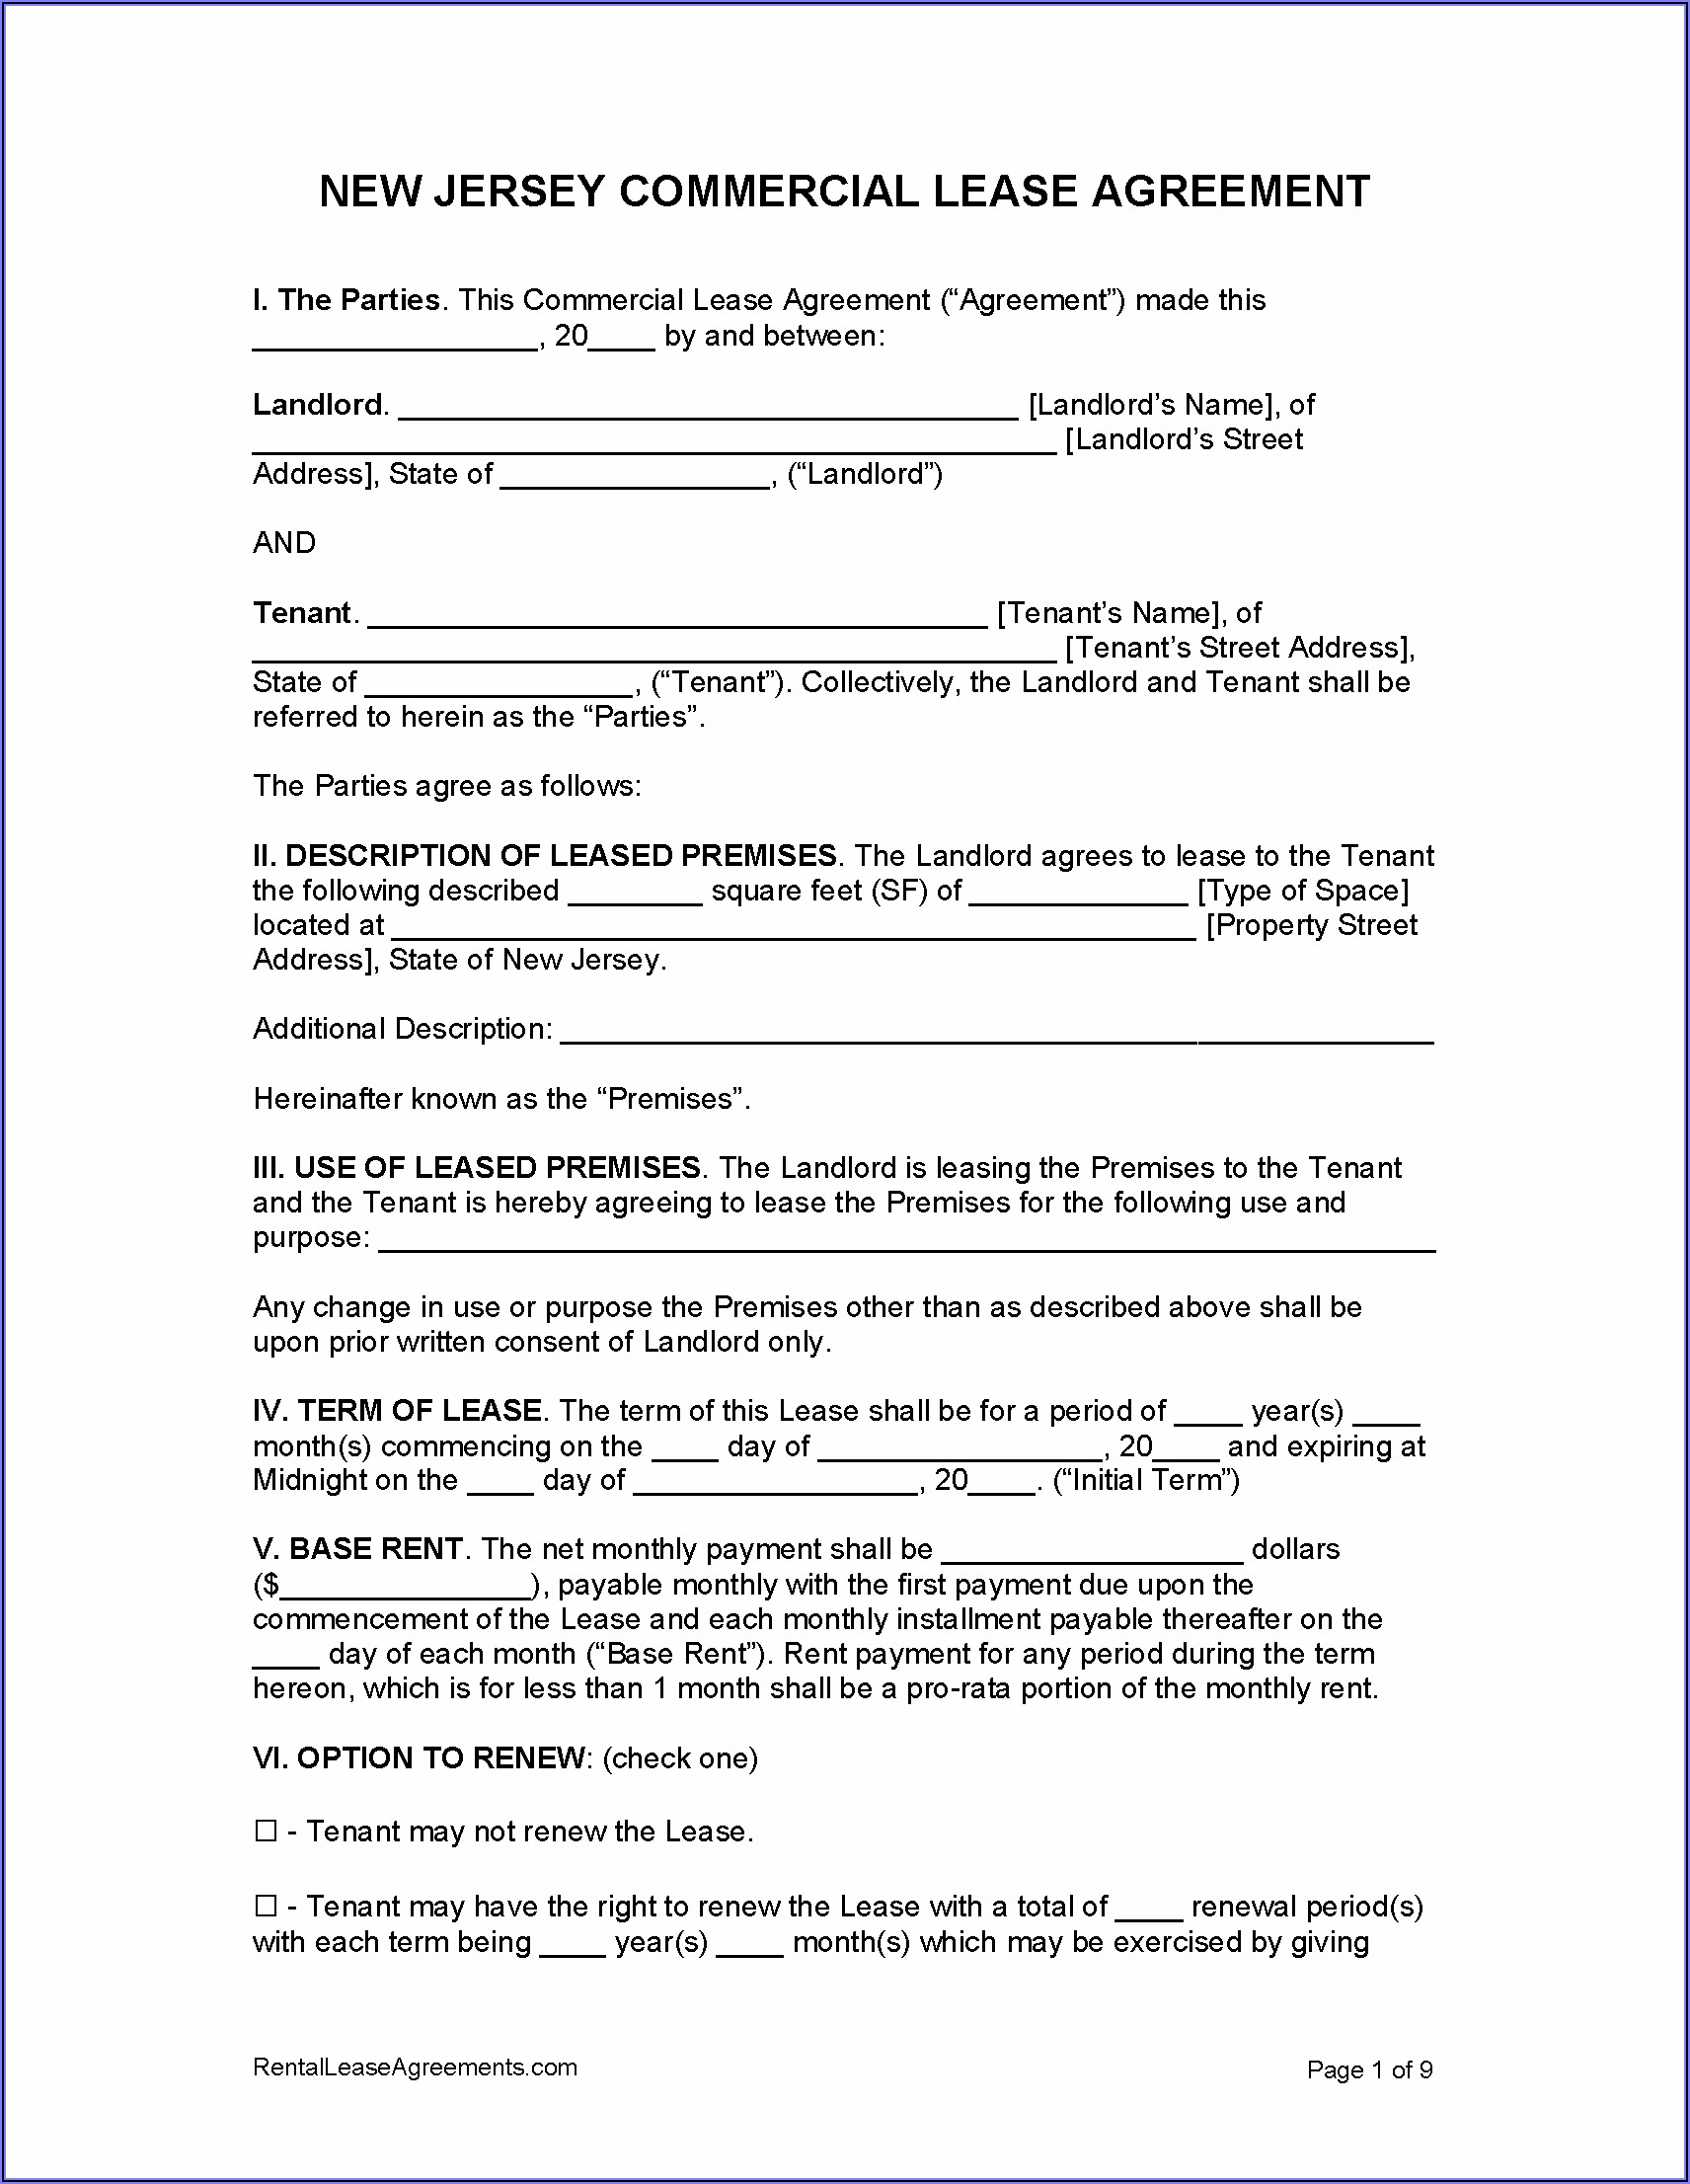 Commercial Real Estate Lease Agreement Sample